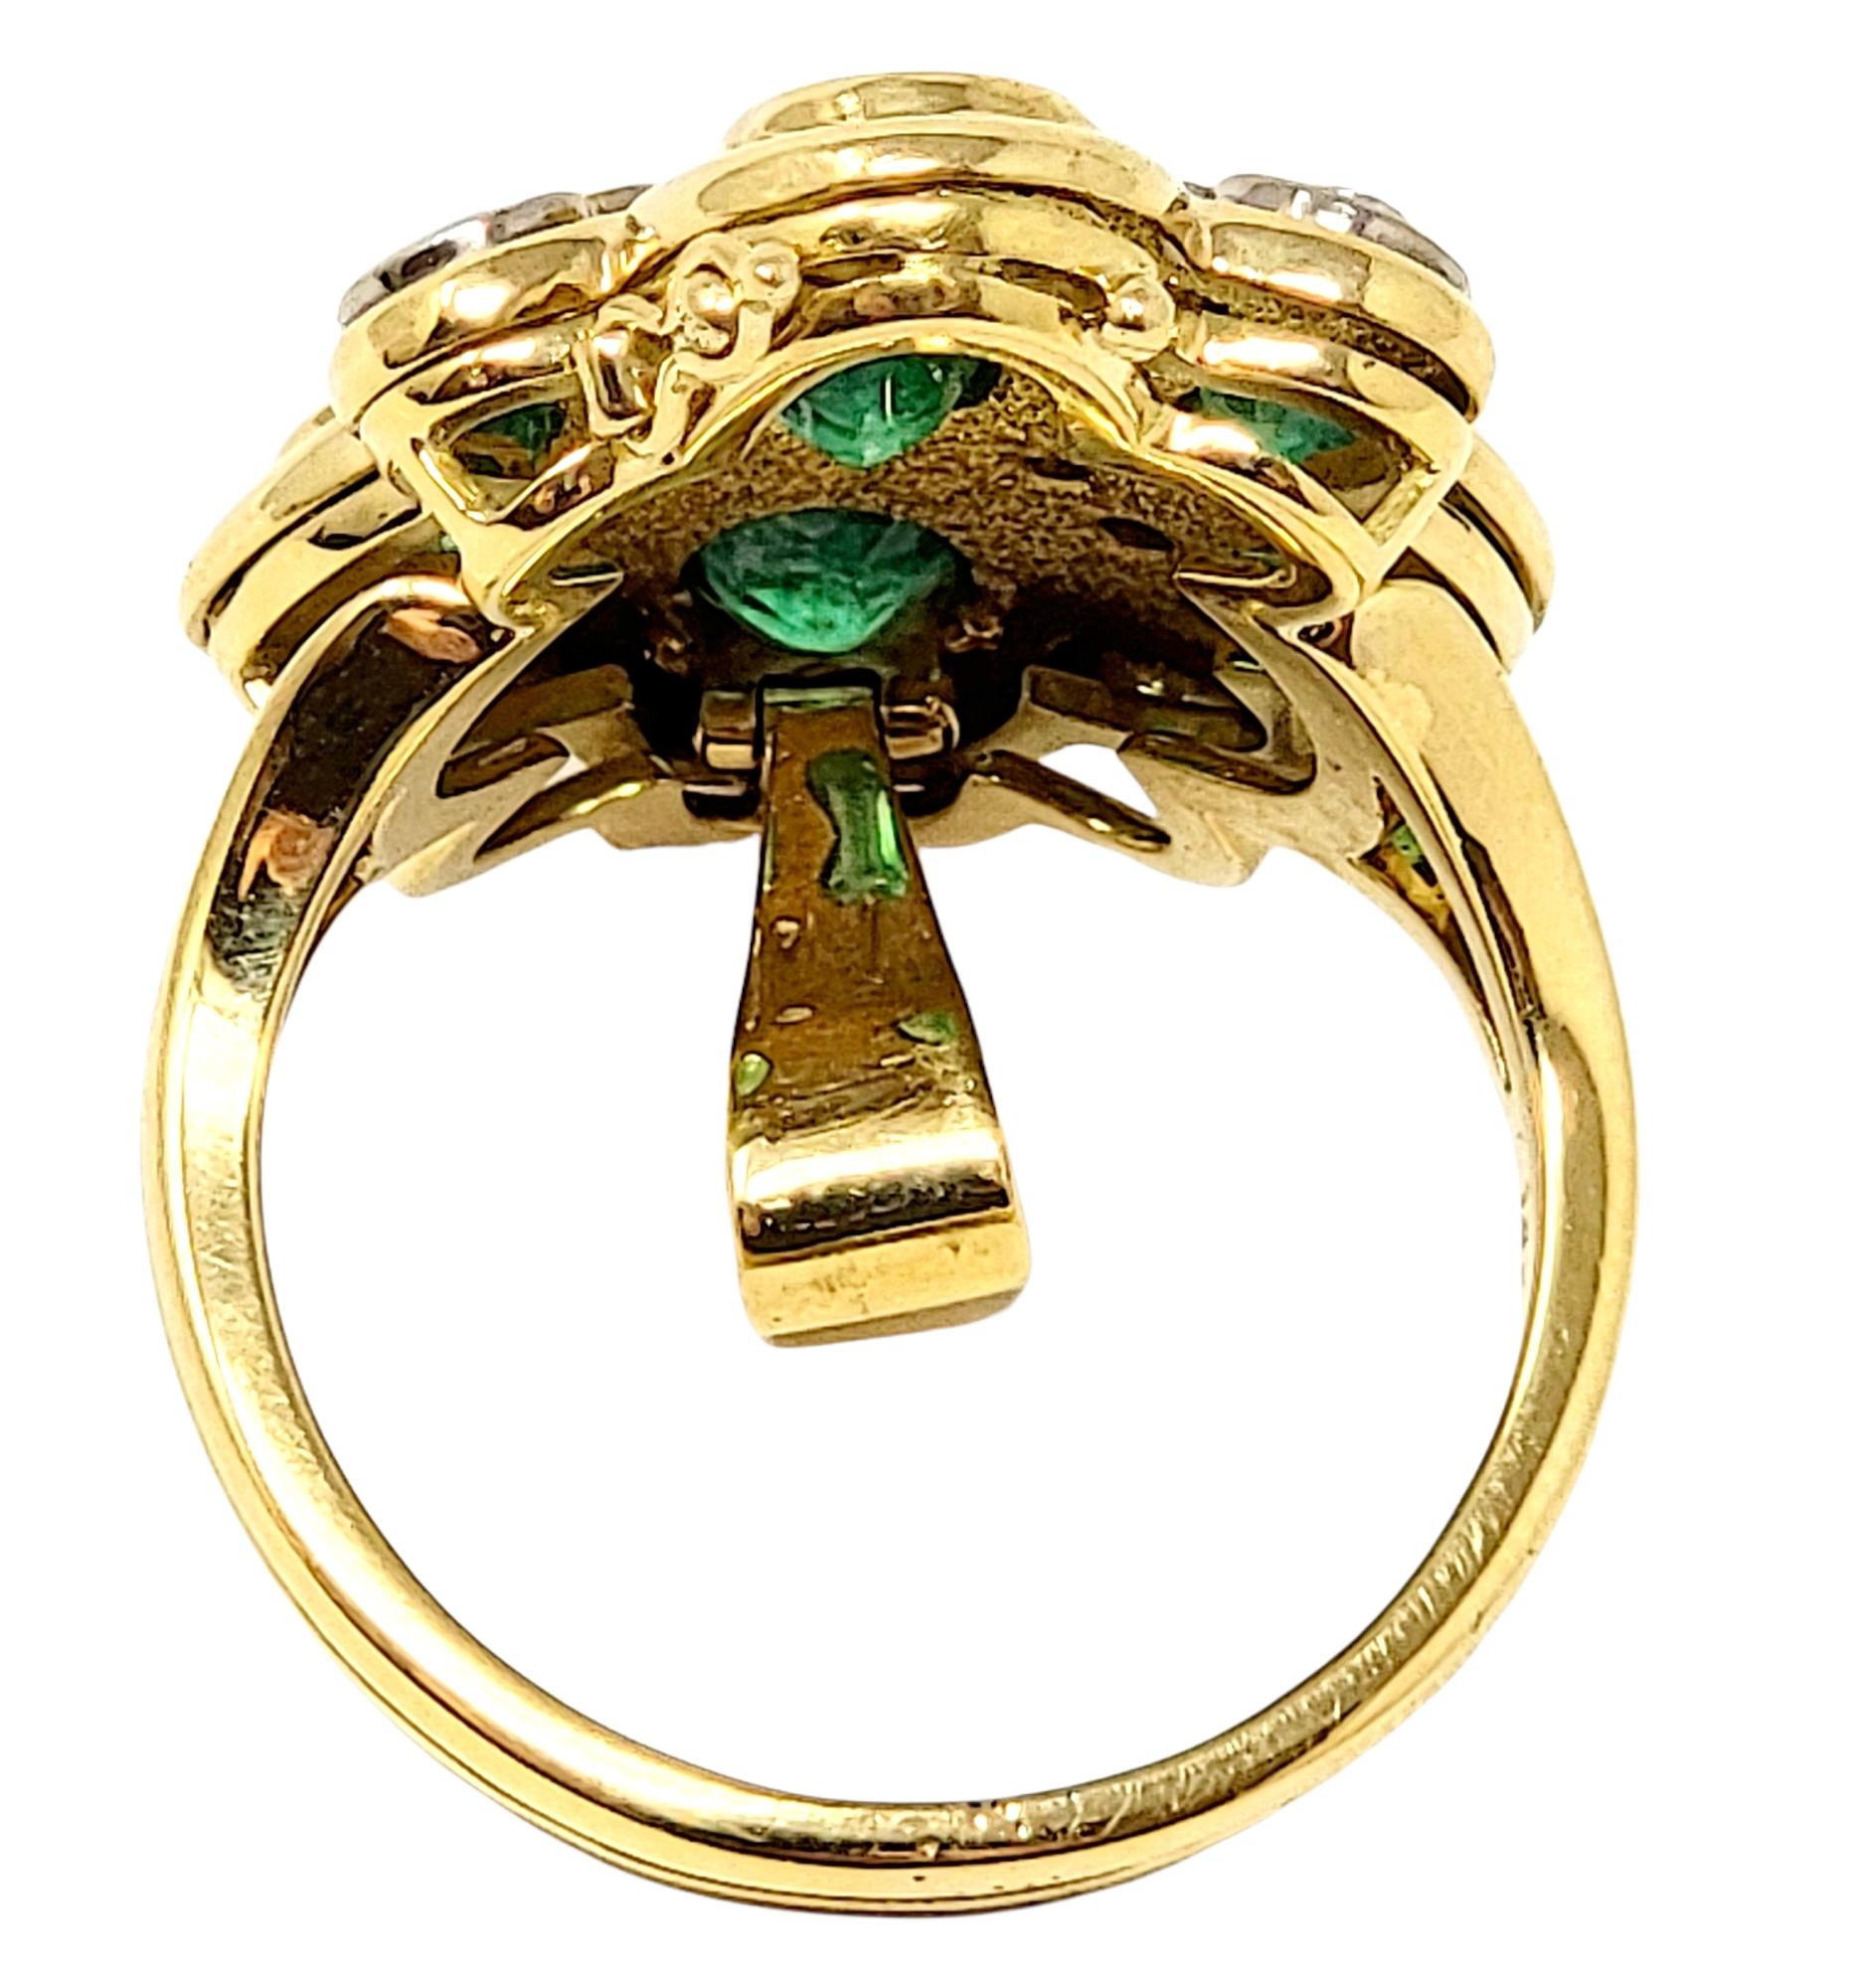 Natural Emerald and Diamond Convertible Ring / Pendant in 18 Karat Yellow Gold In Good Condition For Sale In Scottsdale, AZ